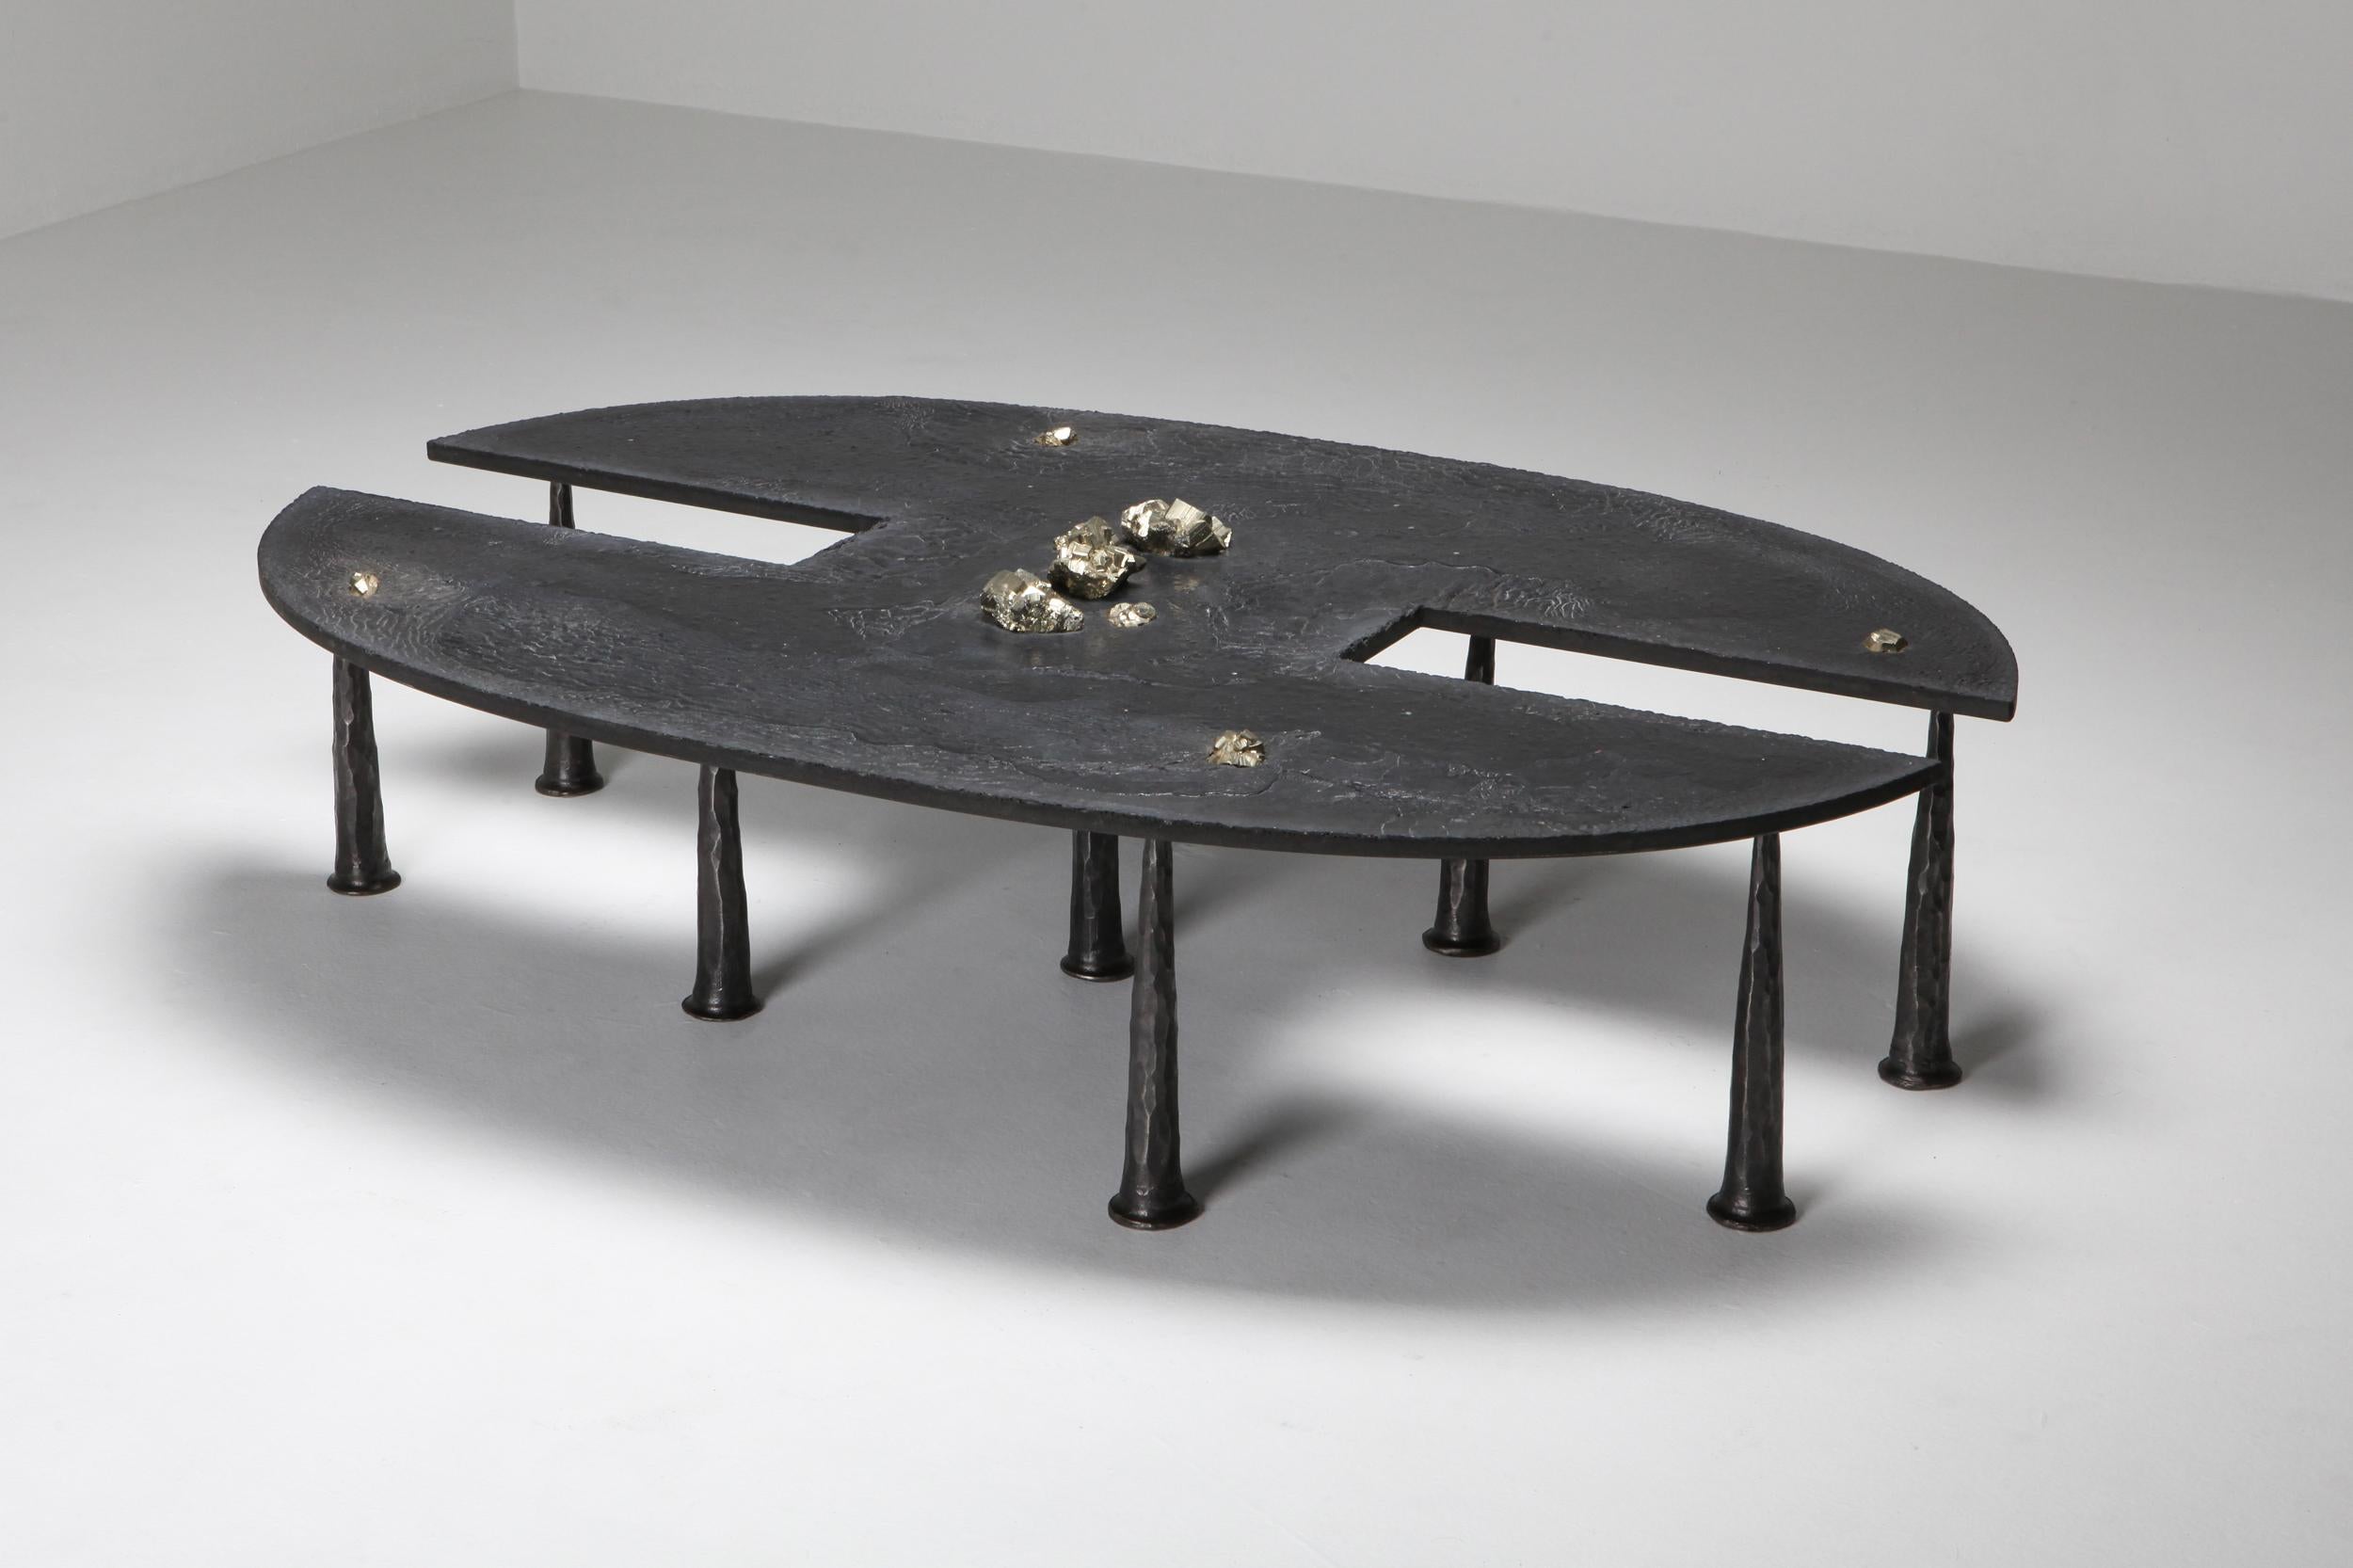 Brutalism, collectible design, Thomas Serruys coffee table, 2019

This unique piece is made out of steel and cement and has an Industrial and Brutalist approach.
Thomas Serruys, 1986, is Belgian designer born in Bruges. Fascinated by machinery,